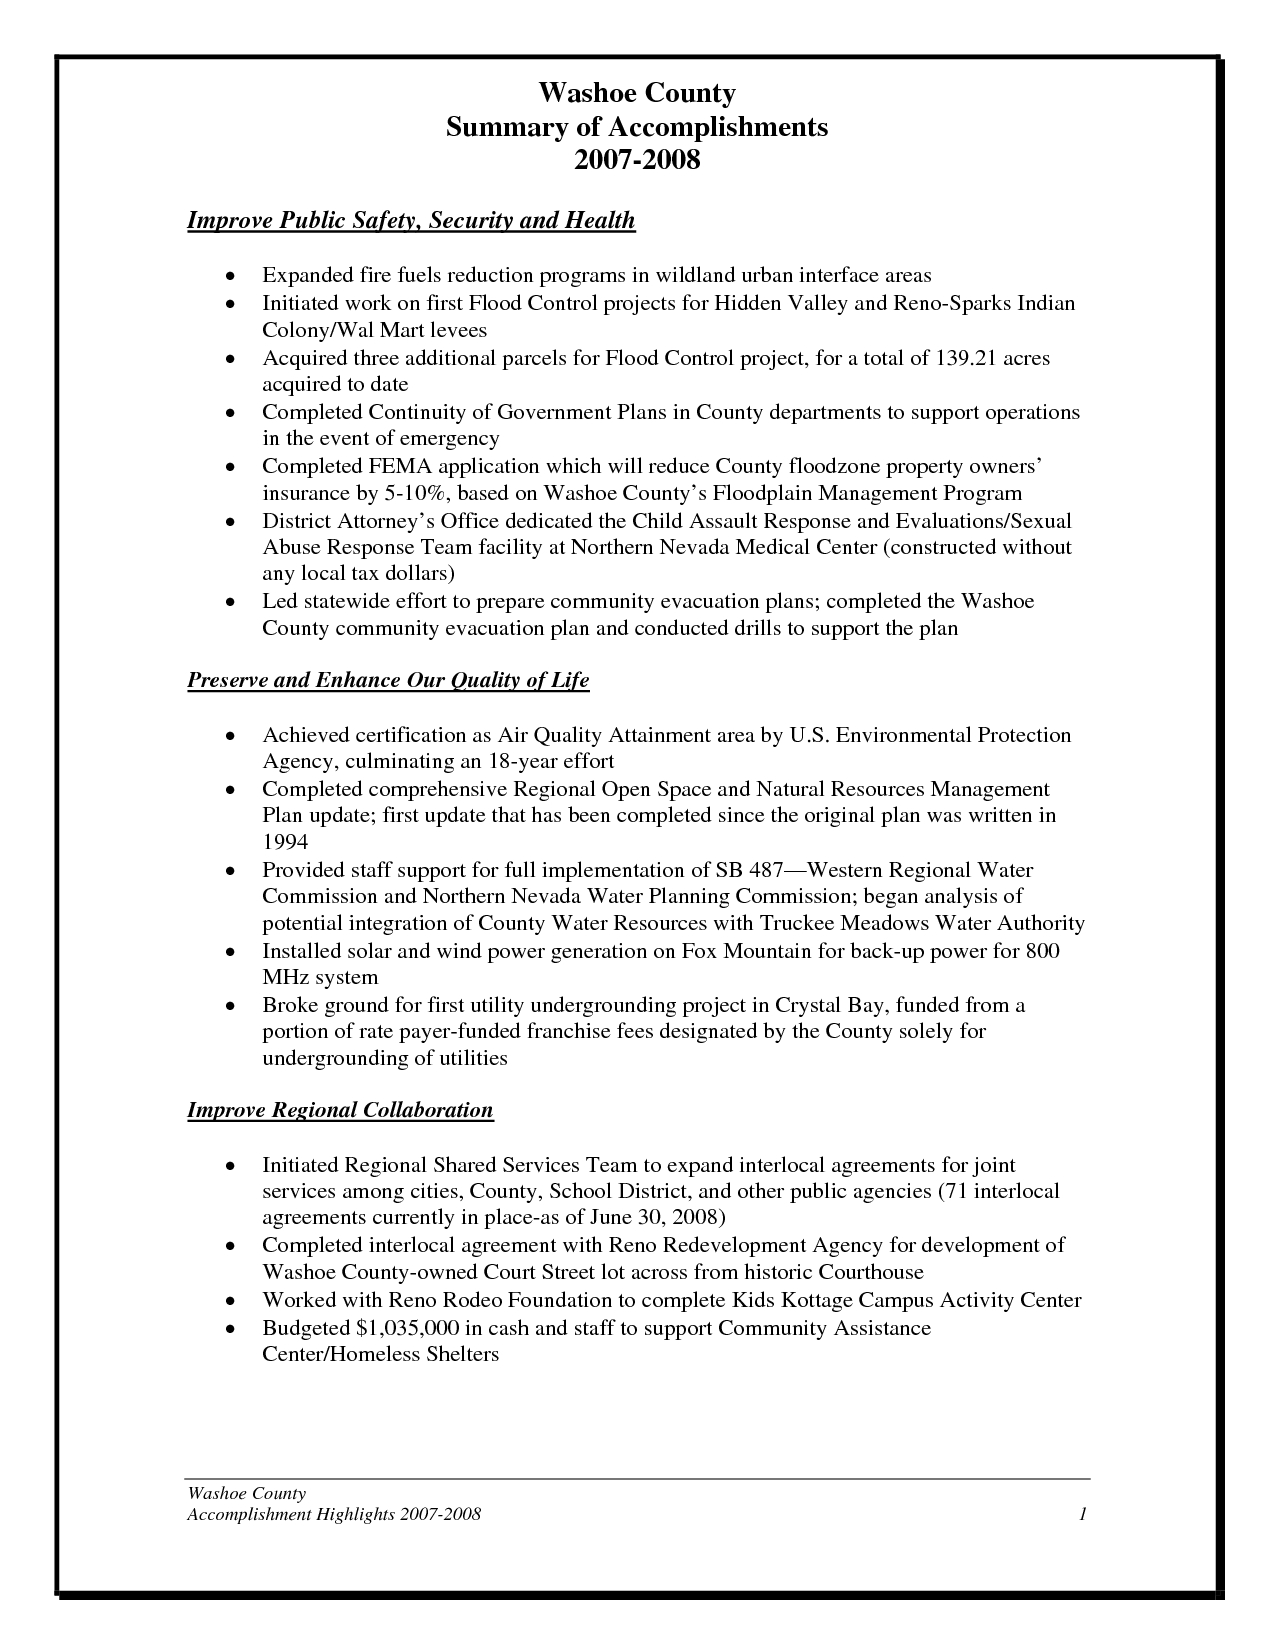 Exceptional Annual Accomplishment Report Summary Sample For With Summary Annual Report Template